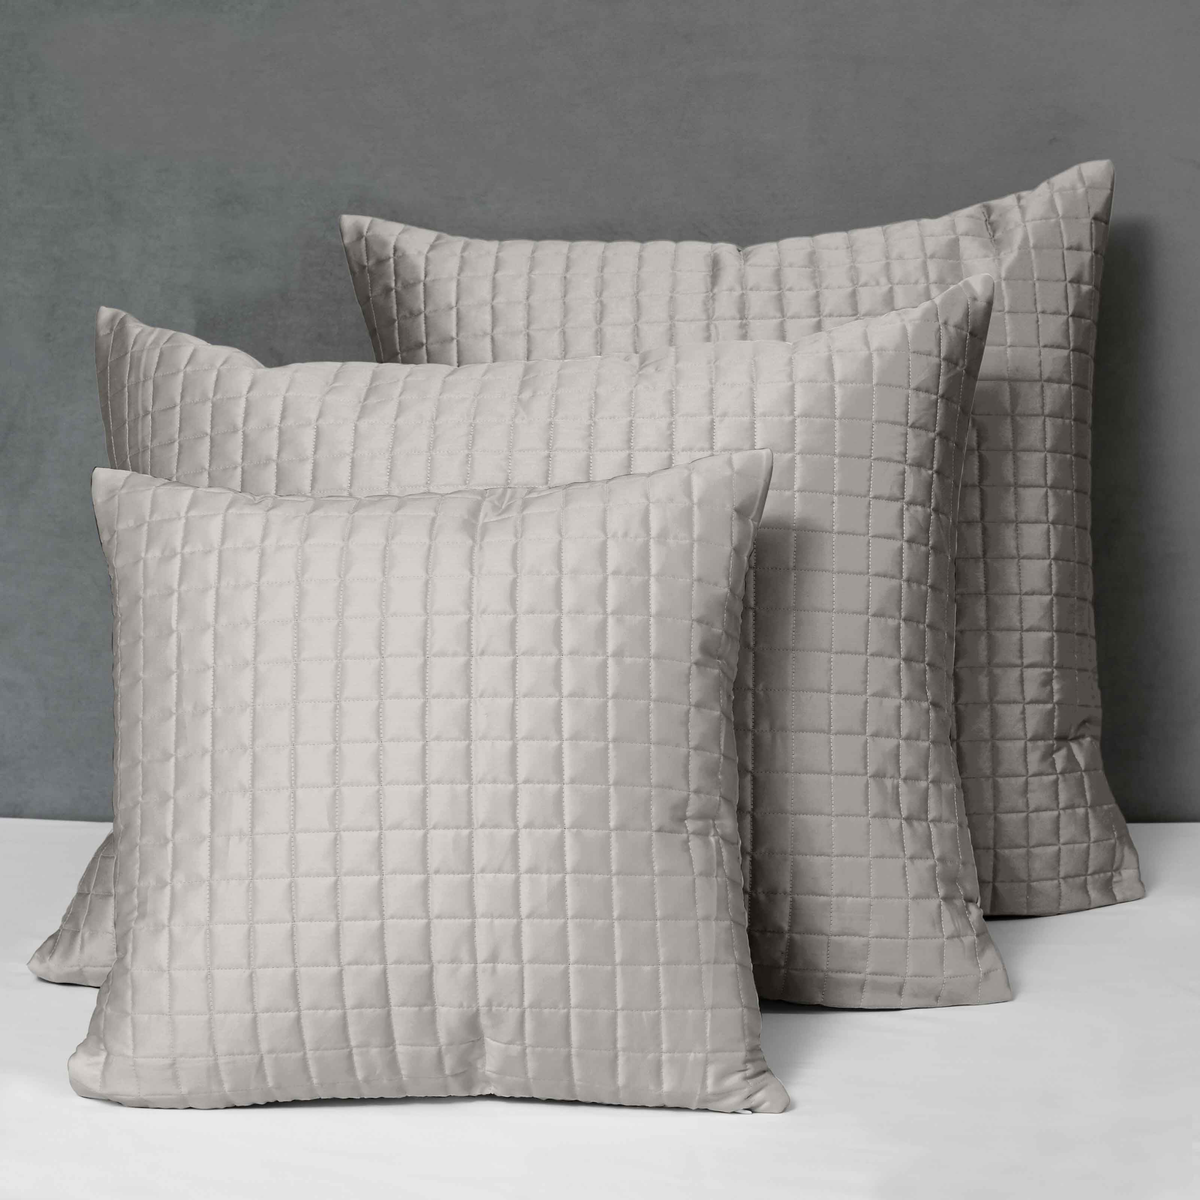 Different Sizes of Quilted Shams of Signoria Masaccio Bedding in Silver Moon Color